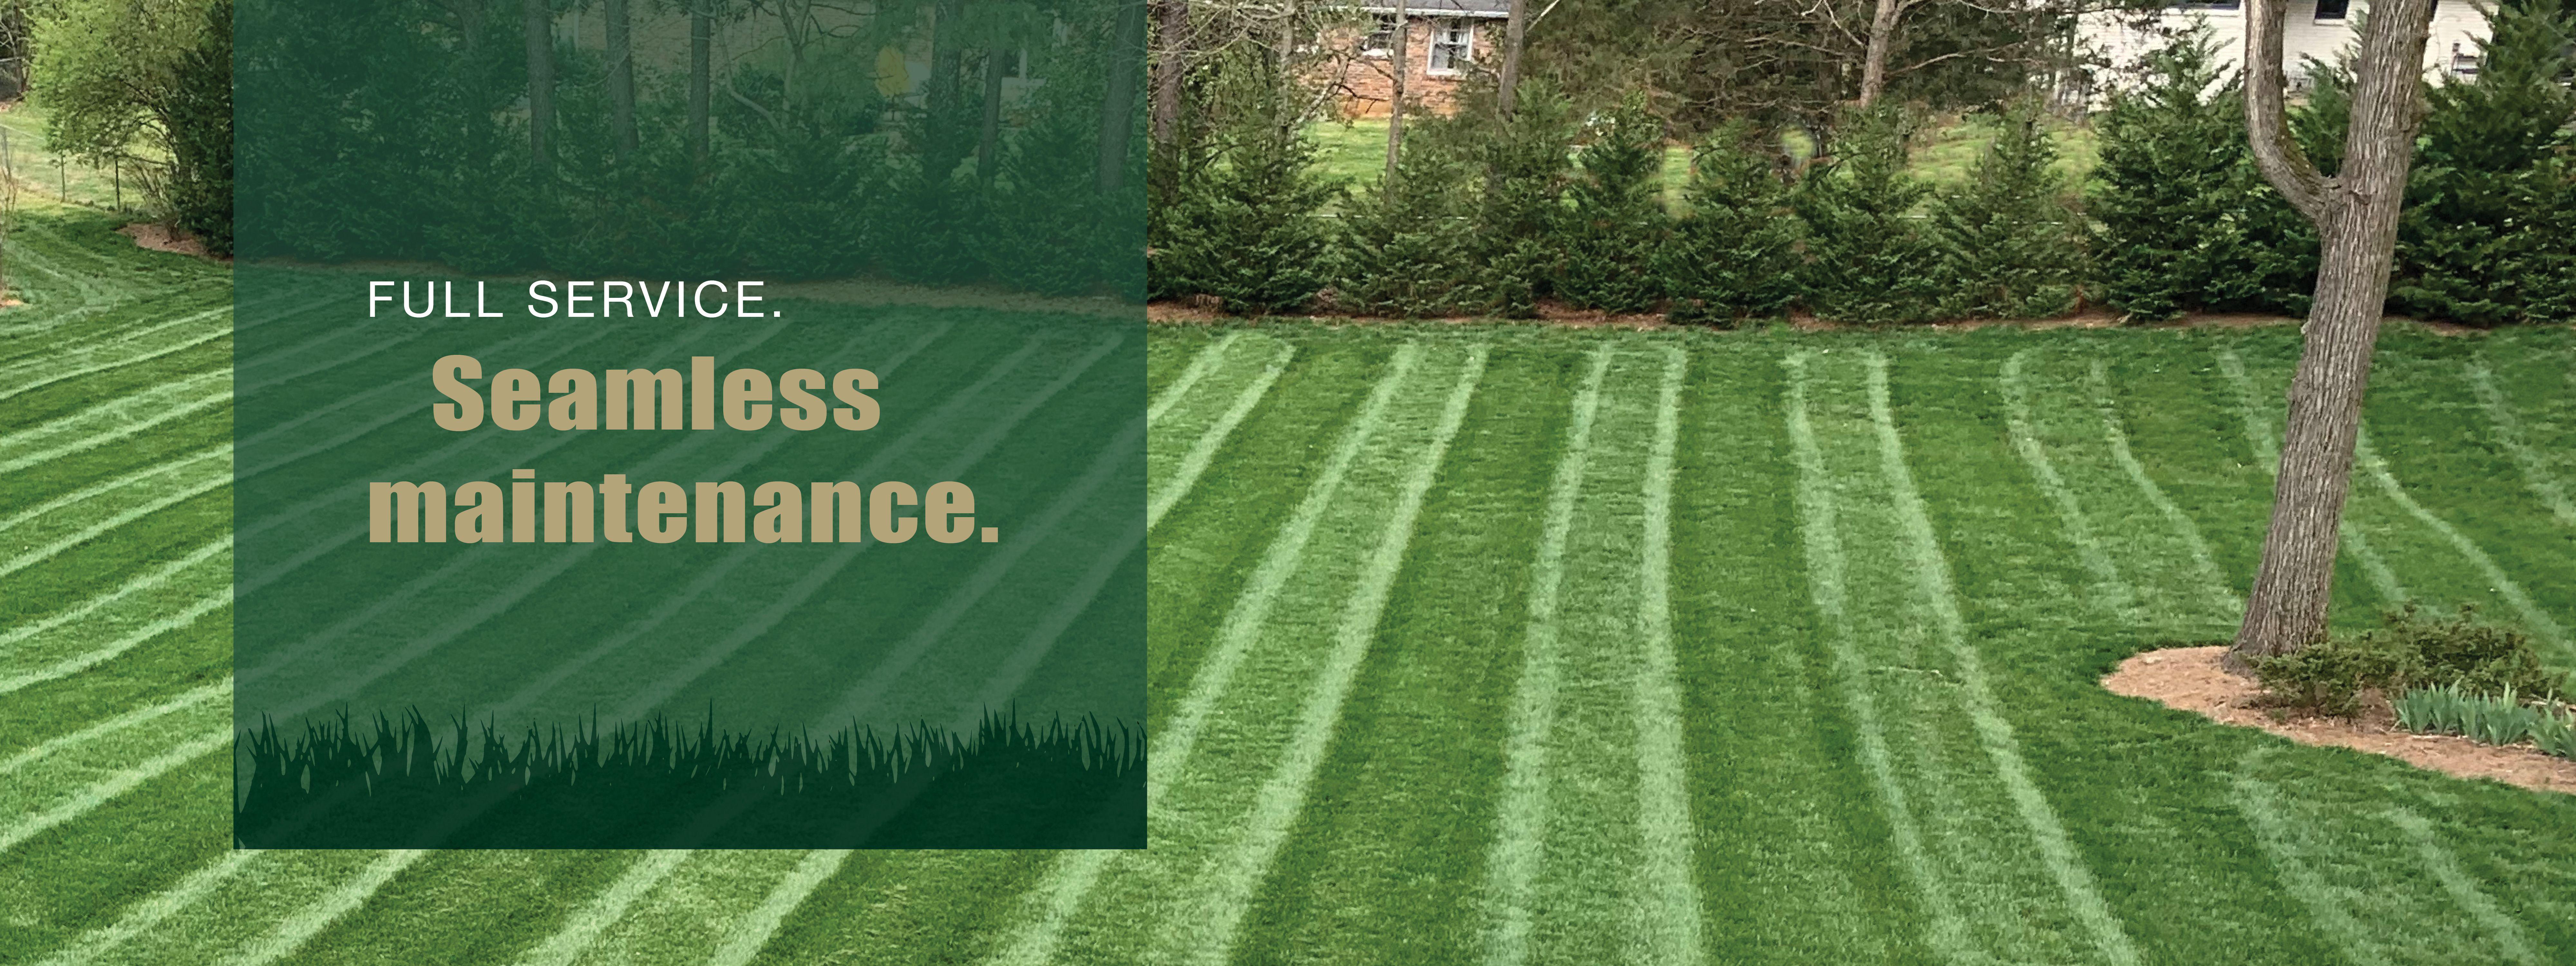 At US Lawn & Landscape we will customize a treatment schedule specifically for your lawn and its needs. Including; 
Seeding, Core aeration, Slow-Release Fertilization, Sodding, Weed control, De-thatching